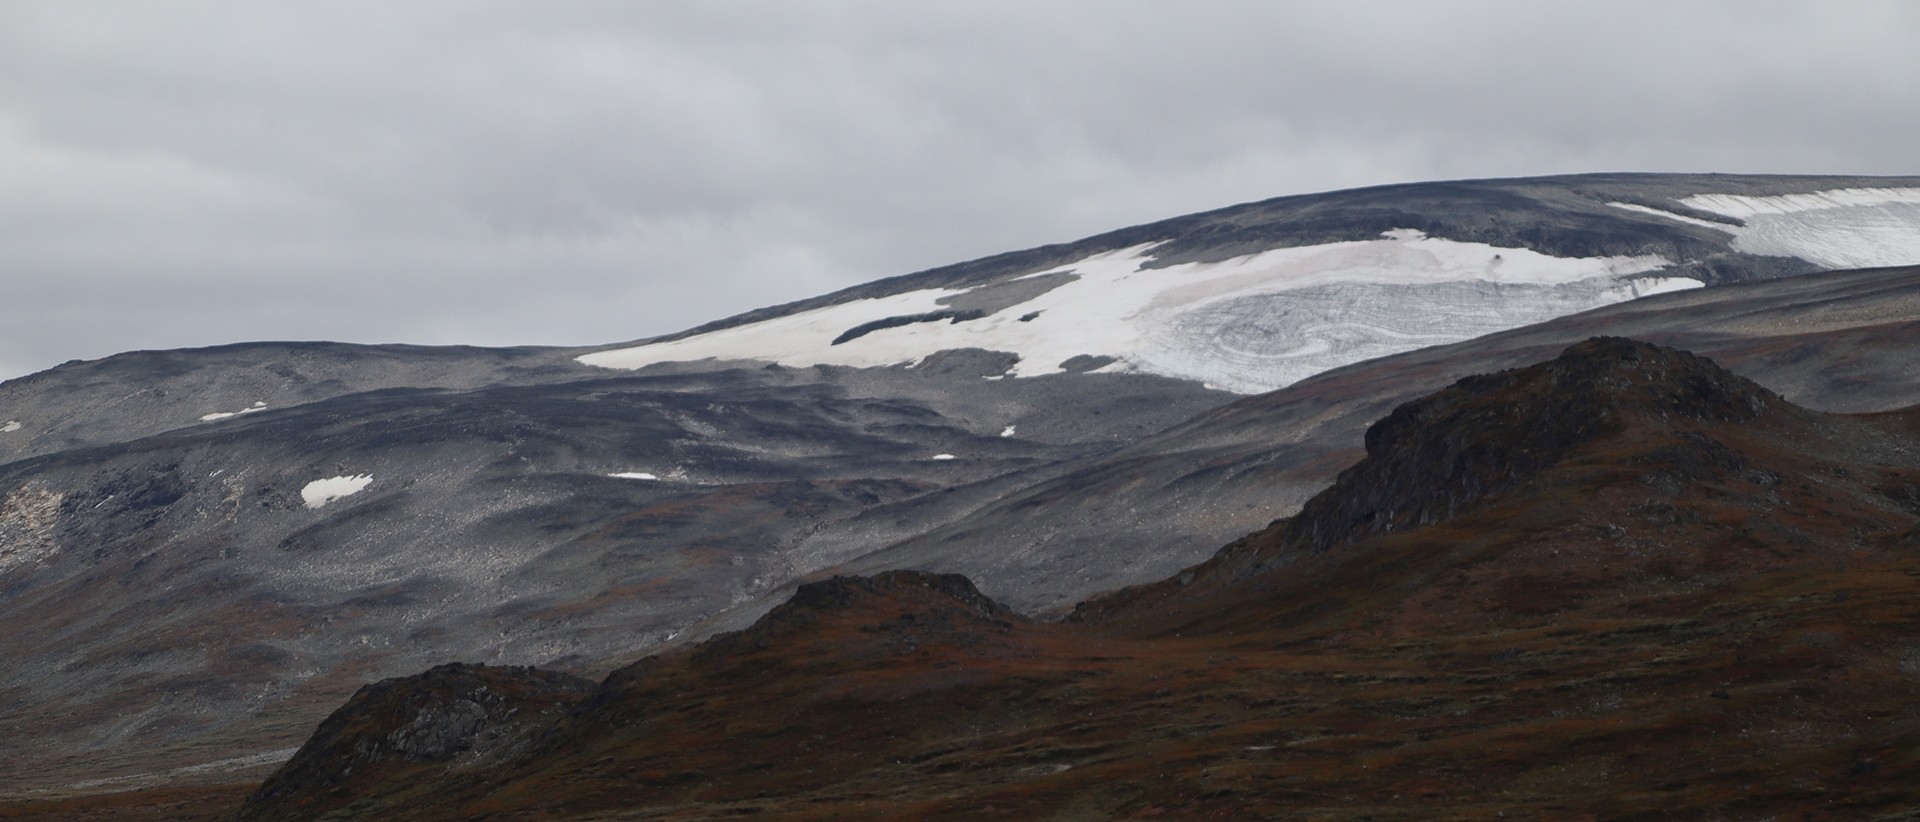 The view of Jotunheimen on a cloudy day.